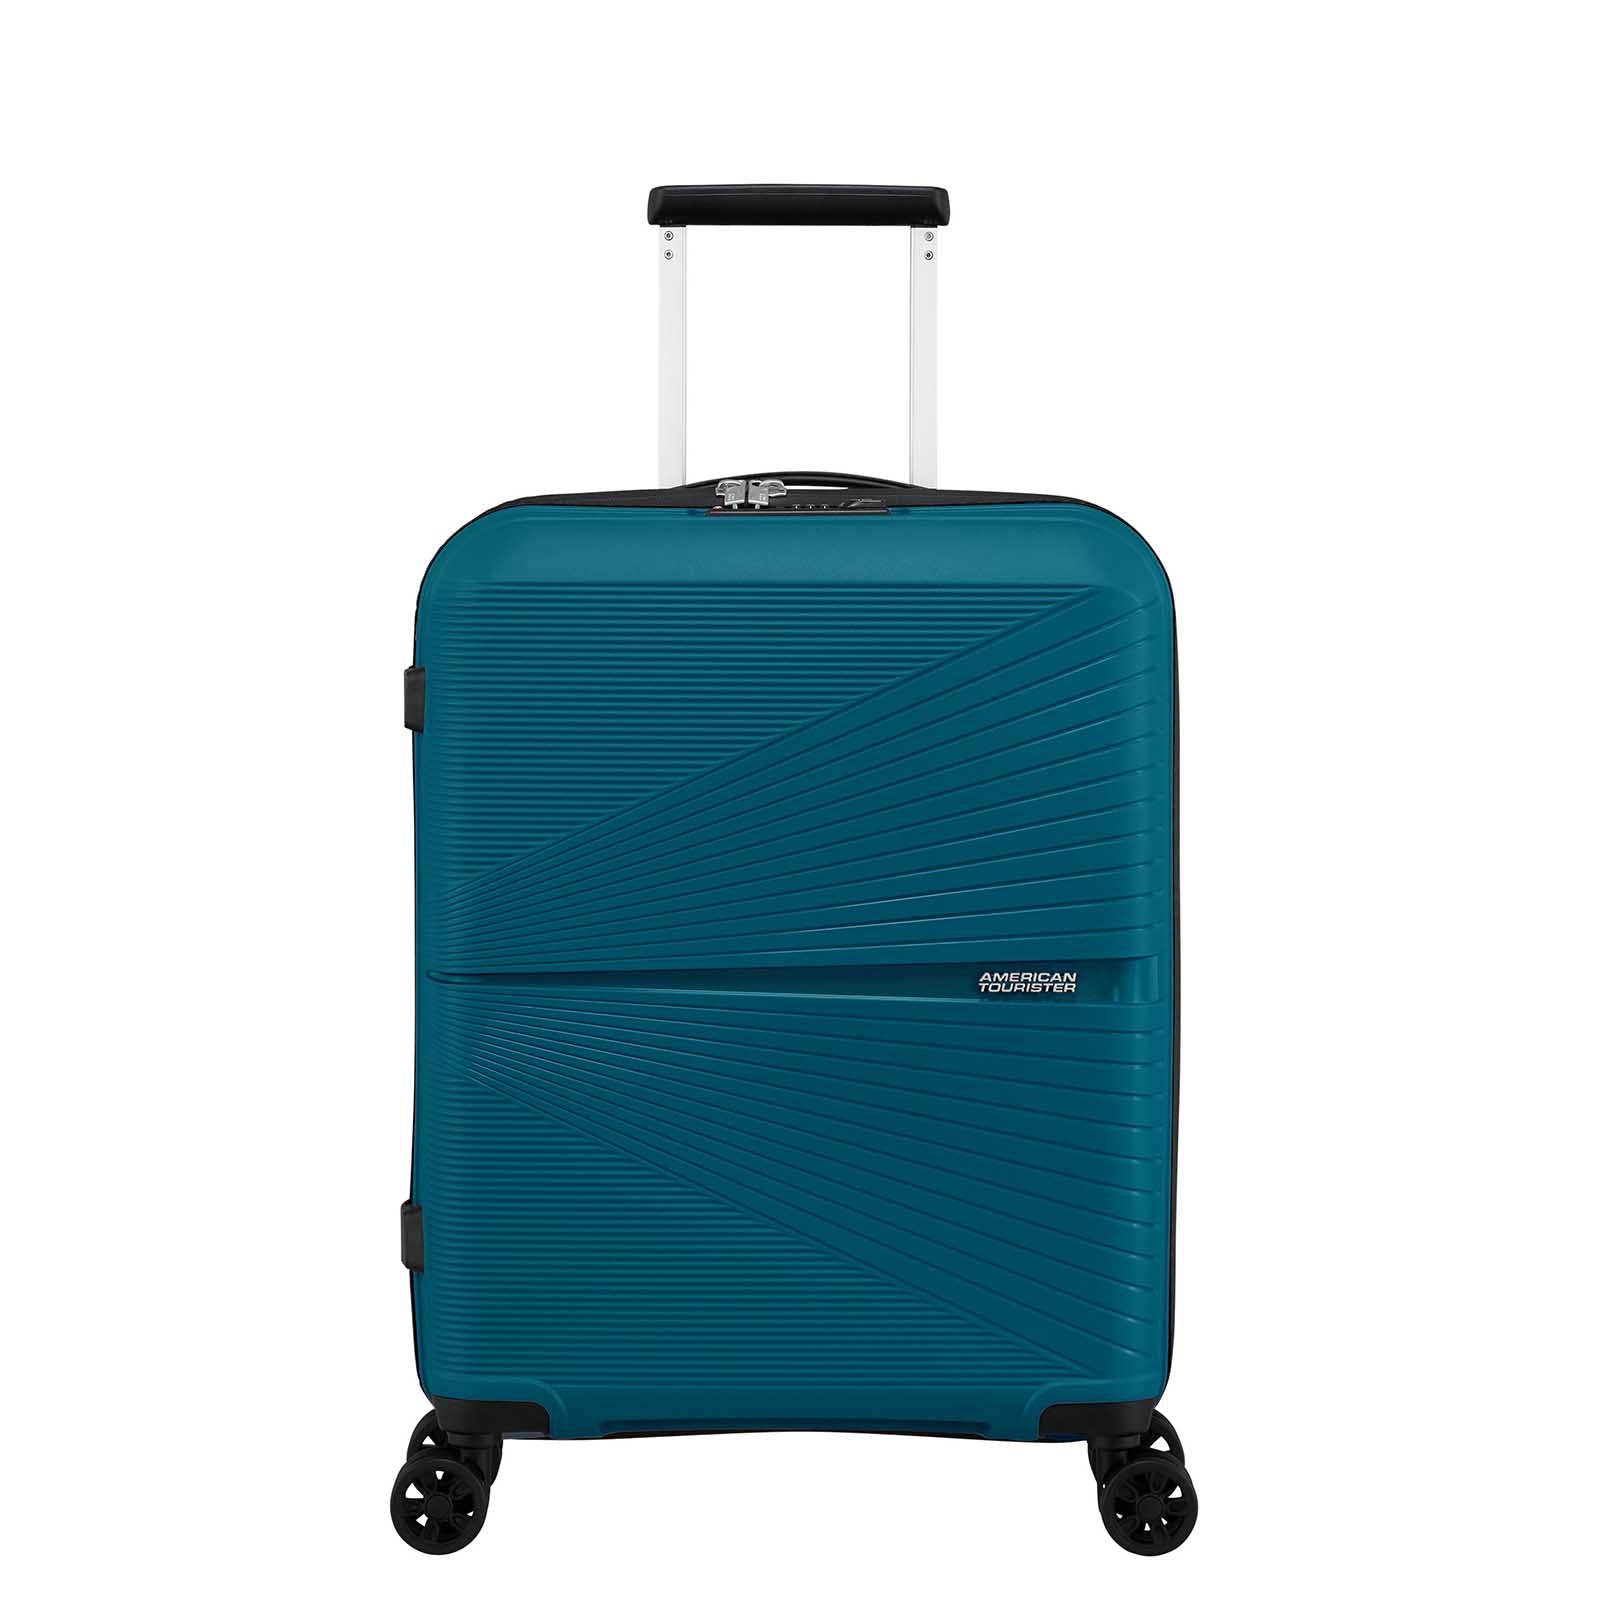 American-Tourister-Airconic-55cm-Carry-On-Suitcase-Deep-Ocean-Front